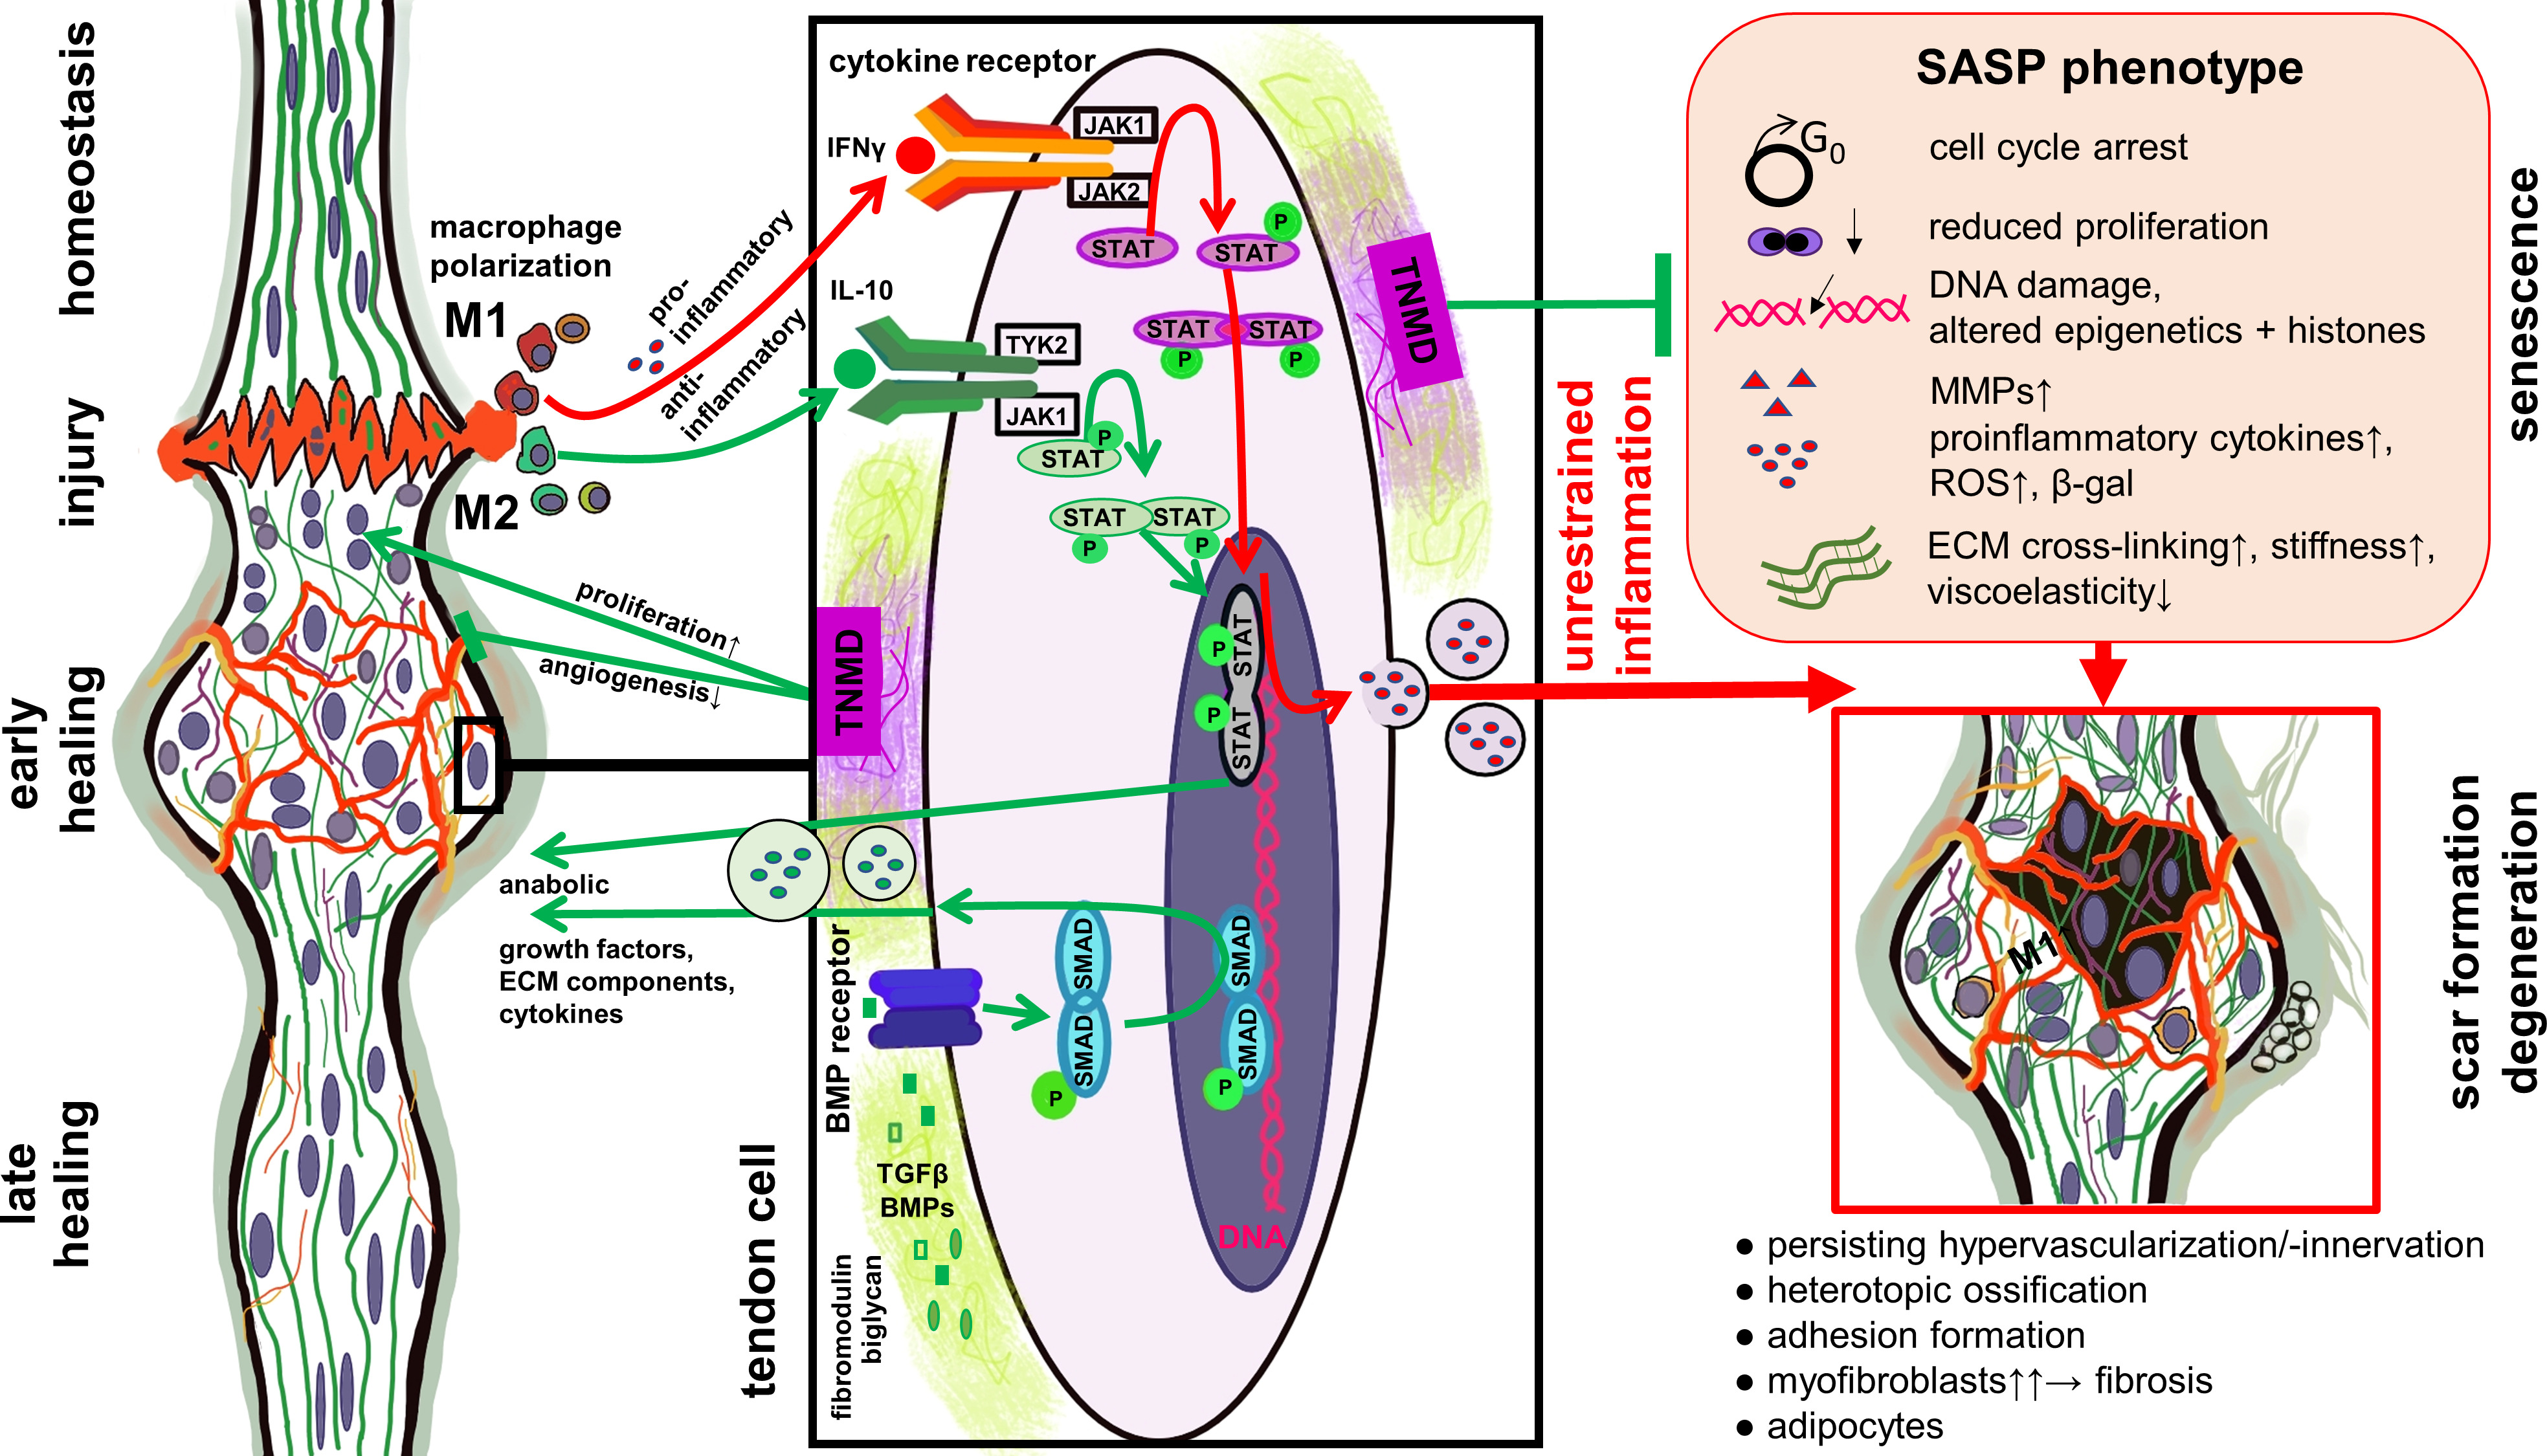 Fig. 3 
            Role of Janus kinase signal transducer and activator of transcription (JAK/STAT) and bone morphogenetic protein (BMP) pathways in tendon healing and degeneration. Simplified scheme of selected signalling pathways involved in tendon healing. The balance of M1 and M2 macrophage polarization plays a central role in resolving the inflammatory phase and affects the outcome of tendon healing. Proinflammatory cytokines released during dominant and prolonged M1 macrophage polarization stimulate molecular factors released in response of the JAK/STAT pathway activation, which can trigger the senescence-associated secretory phenotype (SASP) shift of tendon cells. SASP is associated with degenerative features in healing tendons. Mediators released during M2 macrophage polarization, including anti-inflammatory cytokines such as interleukin (IL)-10, stimulate other parts of the JAK/STAT pathway. Proteoglycans such as biglycan and fibromodulin can bind and stabilize growth factors activating the BMP pathway. Tenomodulin produced by the tendon cells can exert pro-proliferative effect as well as protective roles against cellular senescence and unrestrained angiogenesis. The image was created by G. G. Schulze-Tanzil using Krita 4.1.7 (Krita Foundation, The Netherlands). β-gal, β-galactosidase; ECM, extracellular matrix; IFNγ, interferon γ; MMP, matrix metalloproteinase; ROS, reactive oxygen species; TGFβ, transforming growth factor β; TNMD, tenomodulin.
          